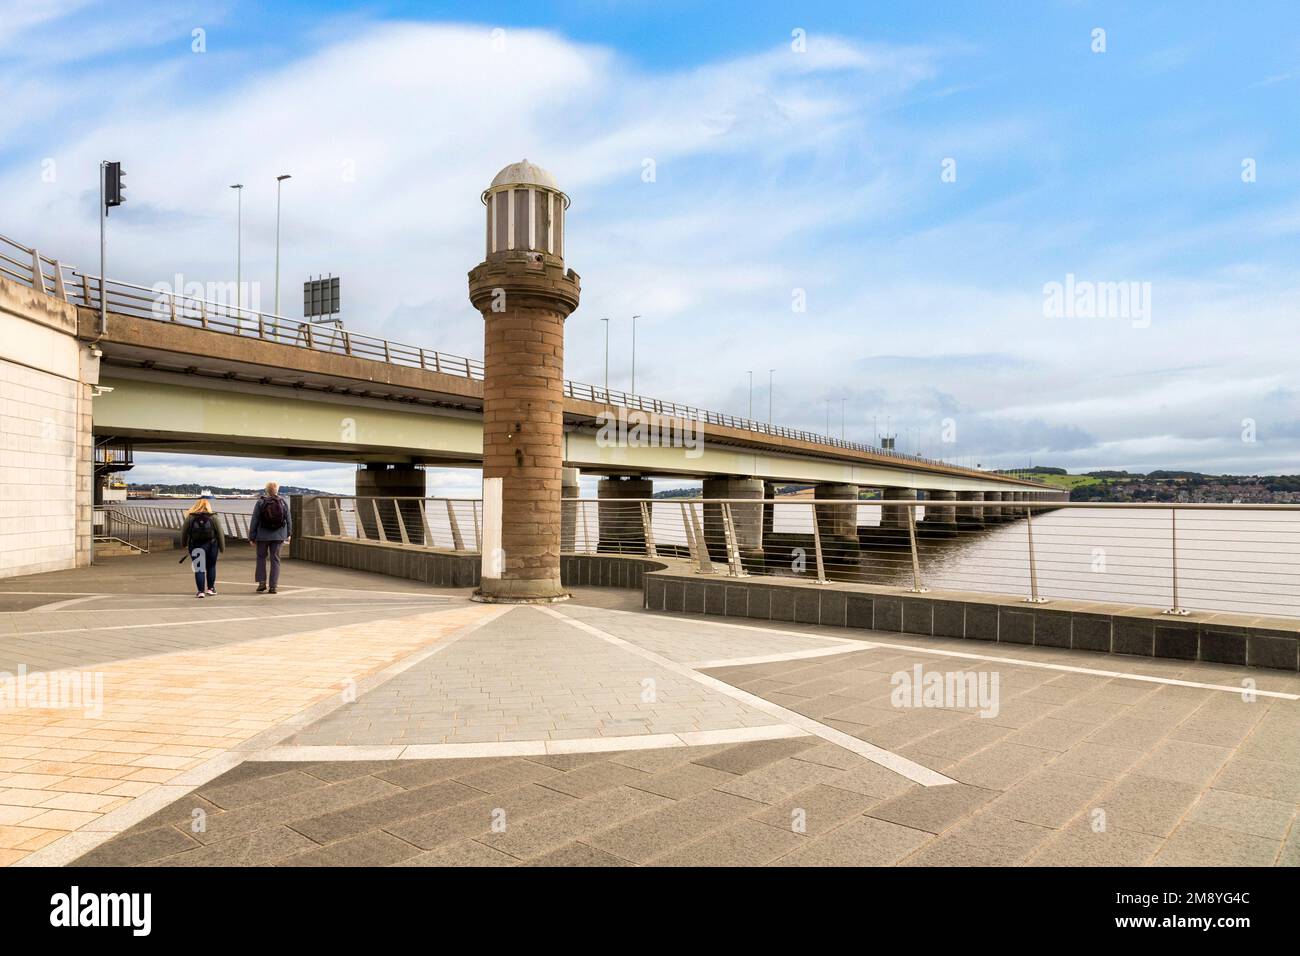 17 September 2022: Dundee, Scotland - The Telford Beacon, built at the entrance to Telford's Docks, now demolished, and the Tay Road Bridge. Stock Photo